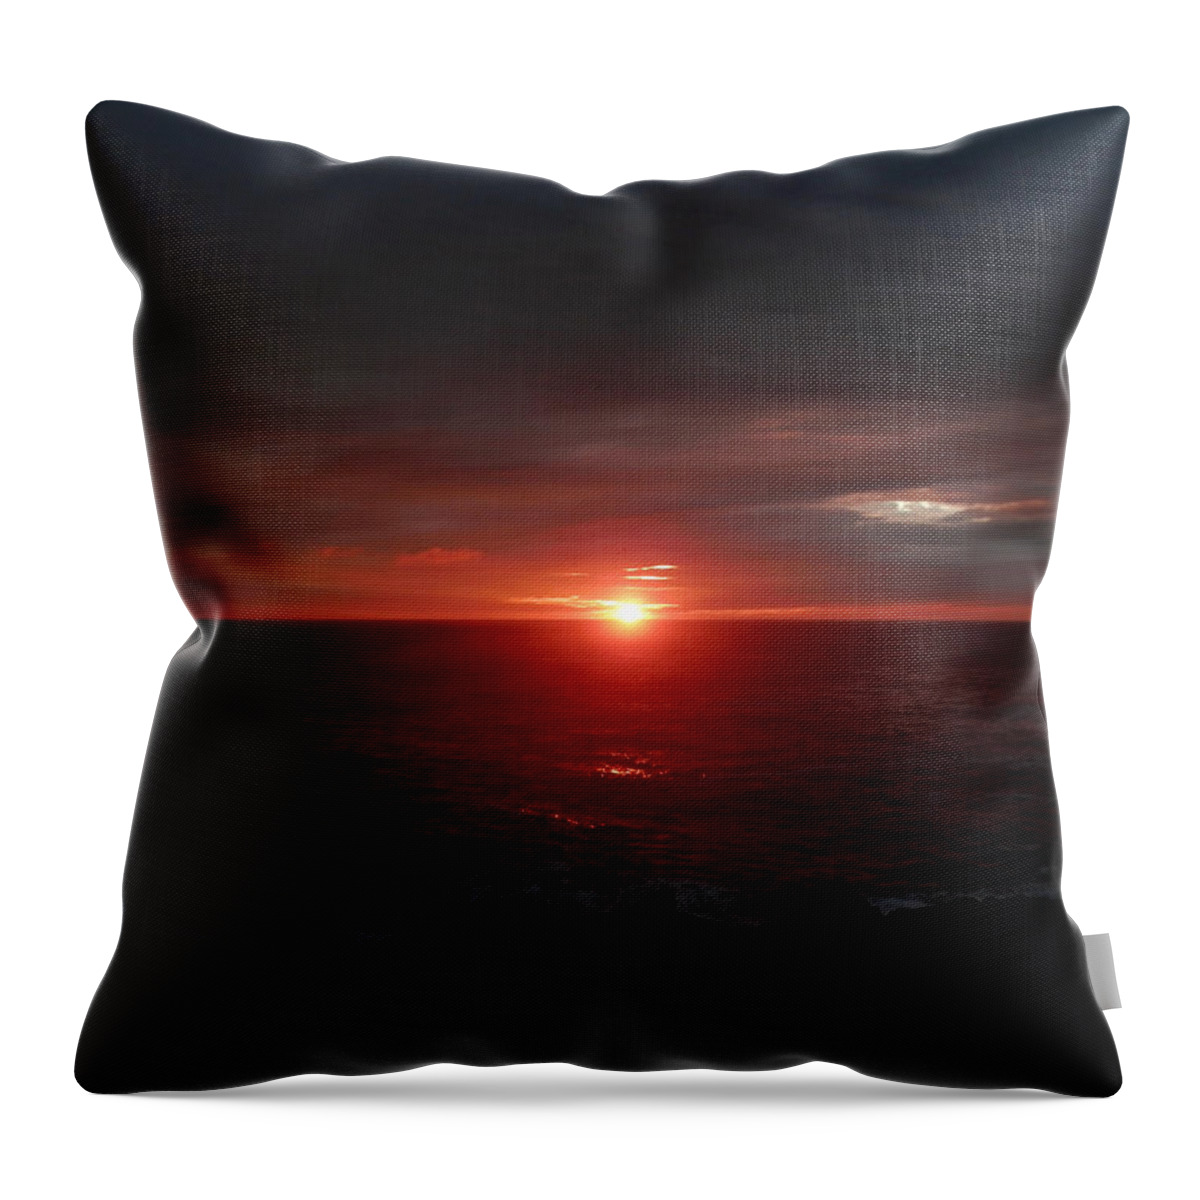 Sunrise Throw Pillow featuring the photograph Sunrise At Cape Spear by Zinvolle Art